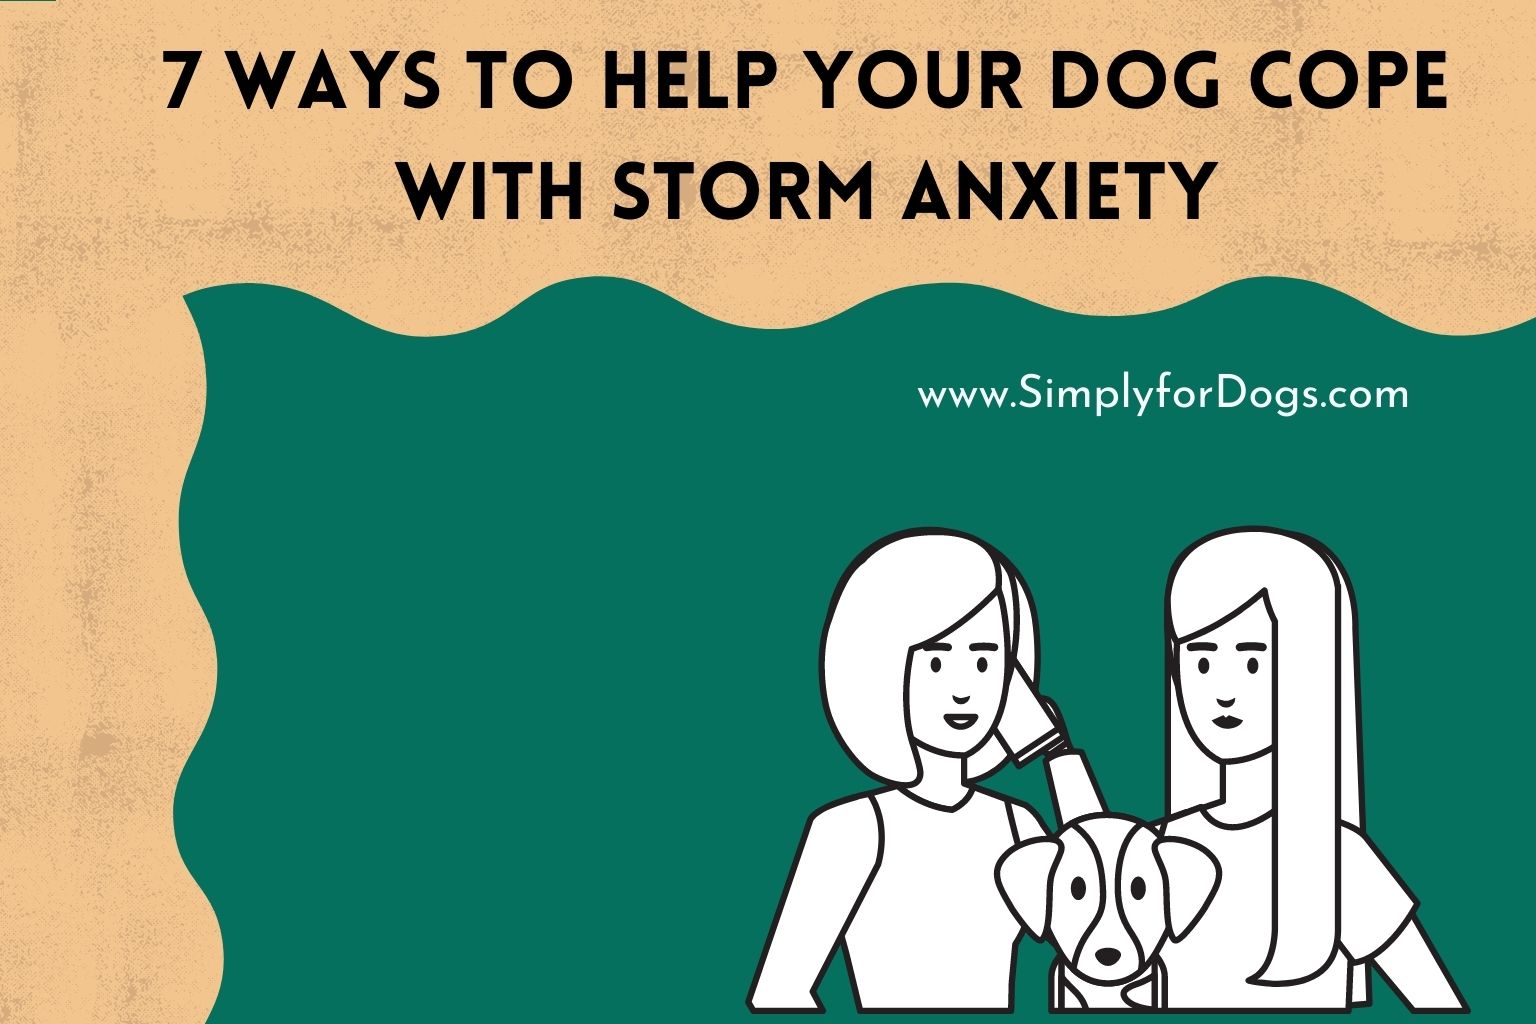 7 Ways to Help Your Dog Cope with Storm Anxiety